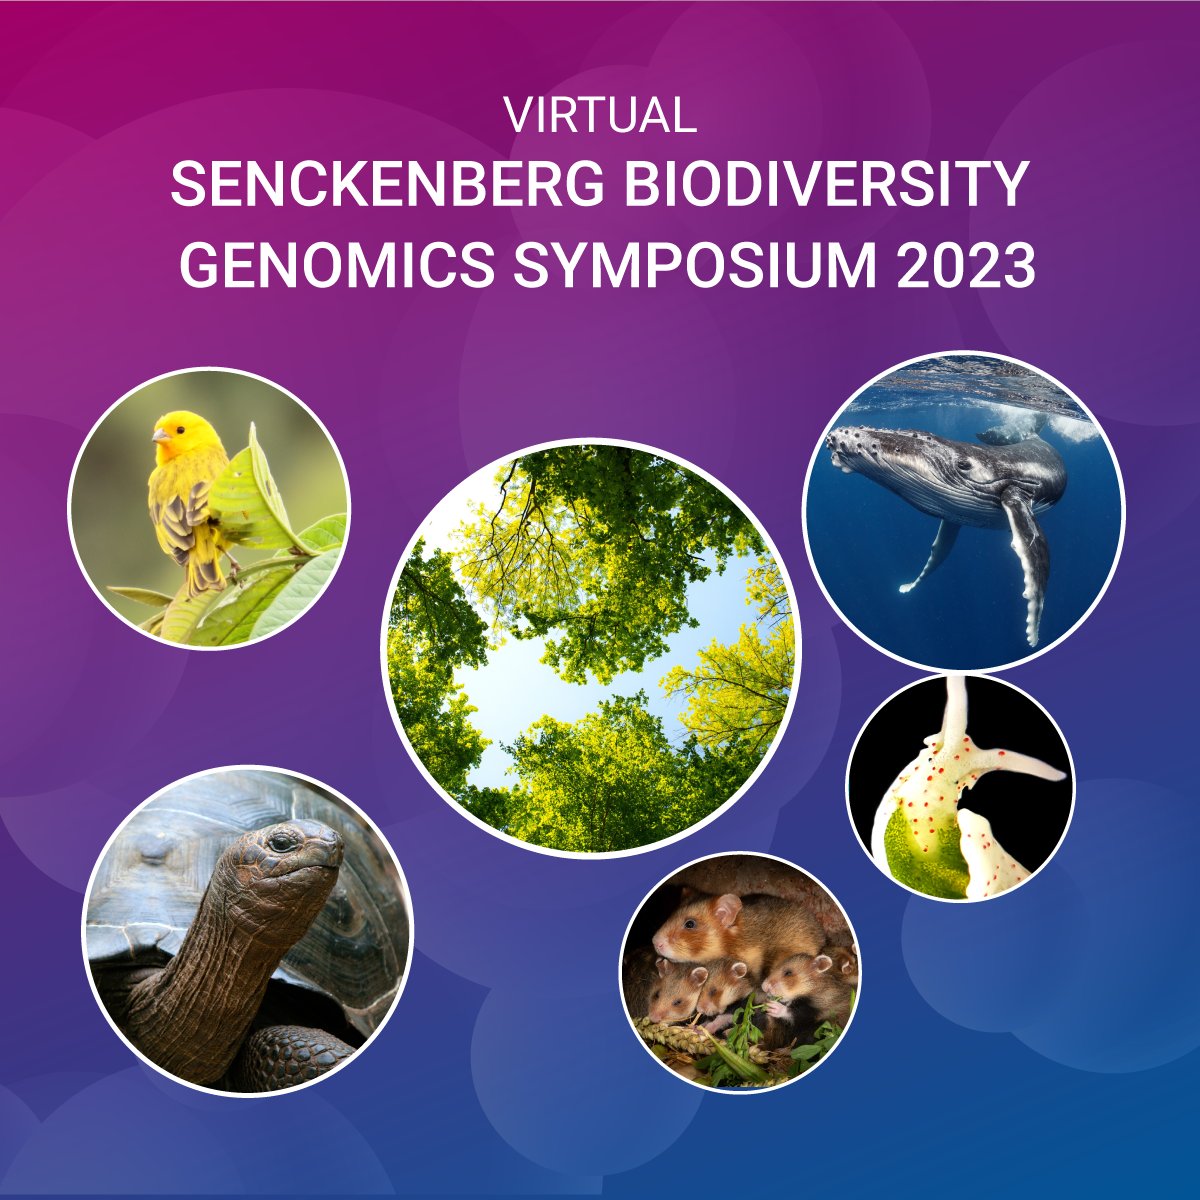 Only 2 days left and then our exciting @LOEWE_TBG @Senckenberg Biodiversity Genomics Symposium using @PacBio sequencing will start. I am honored to host the 2nd scientific session with talks about European field hamsters, songbirds, vampire bats, blue whales and tortoises.